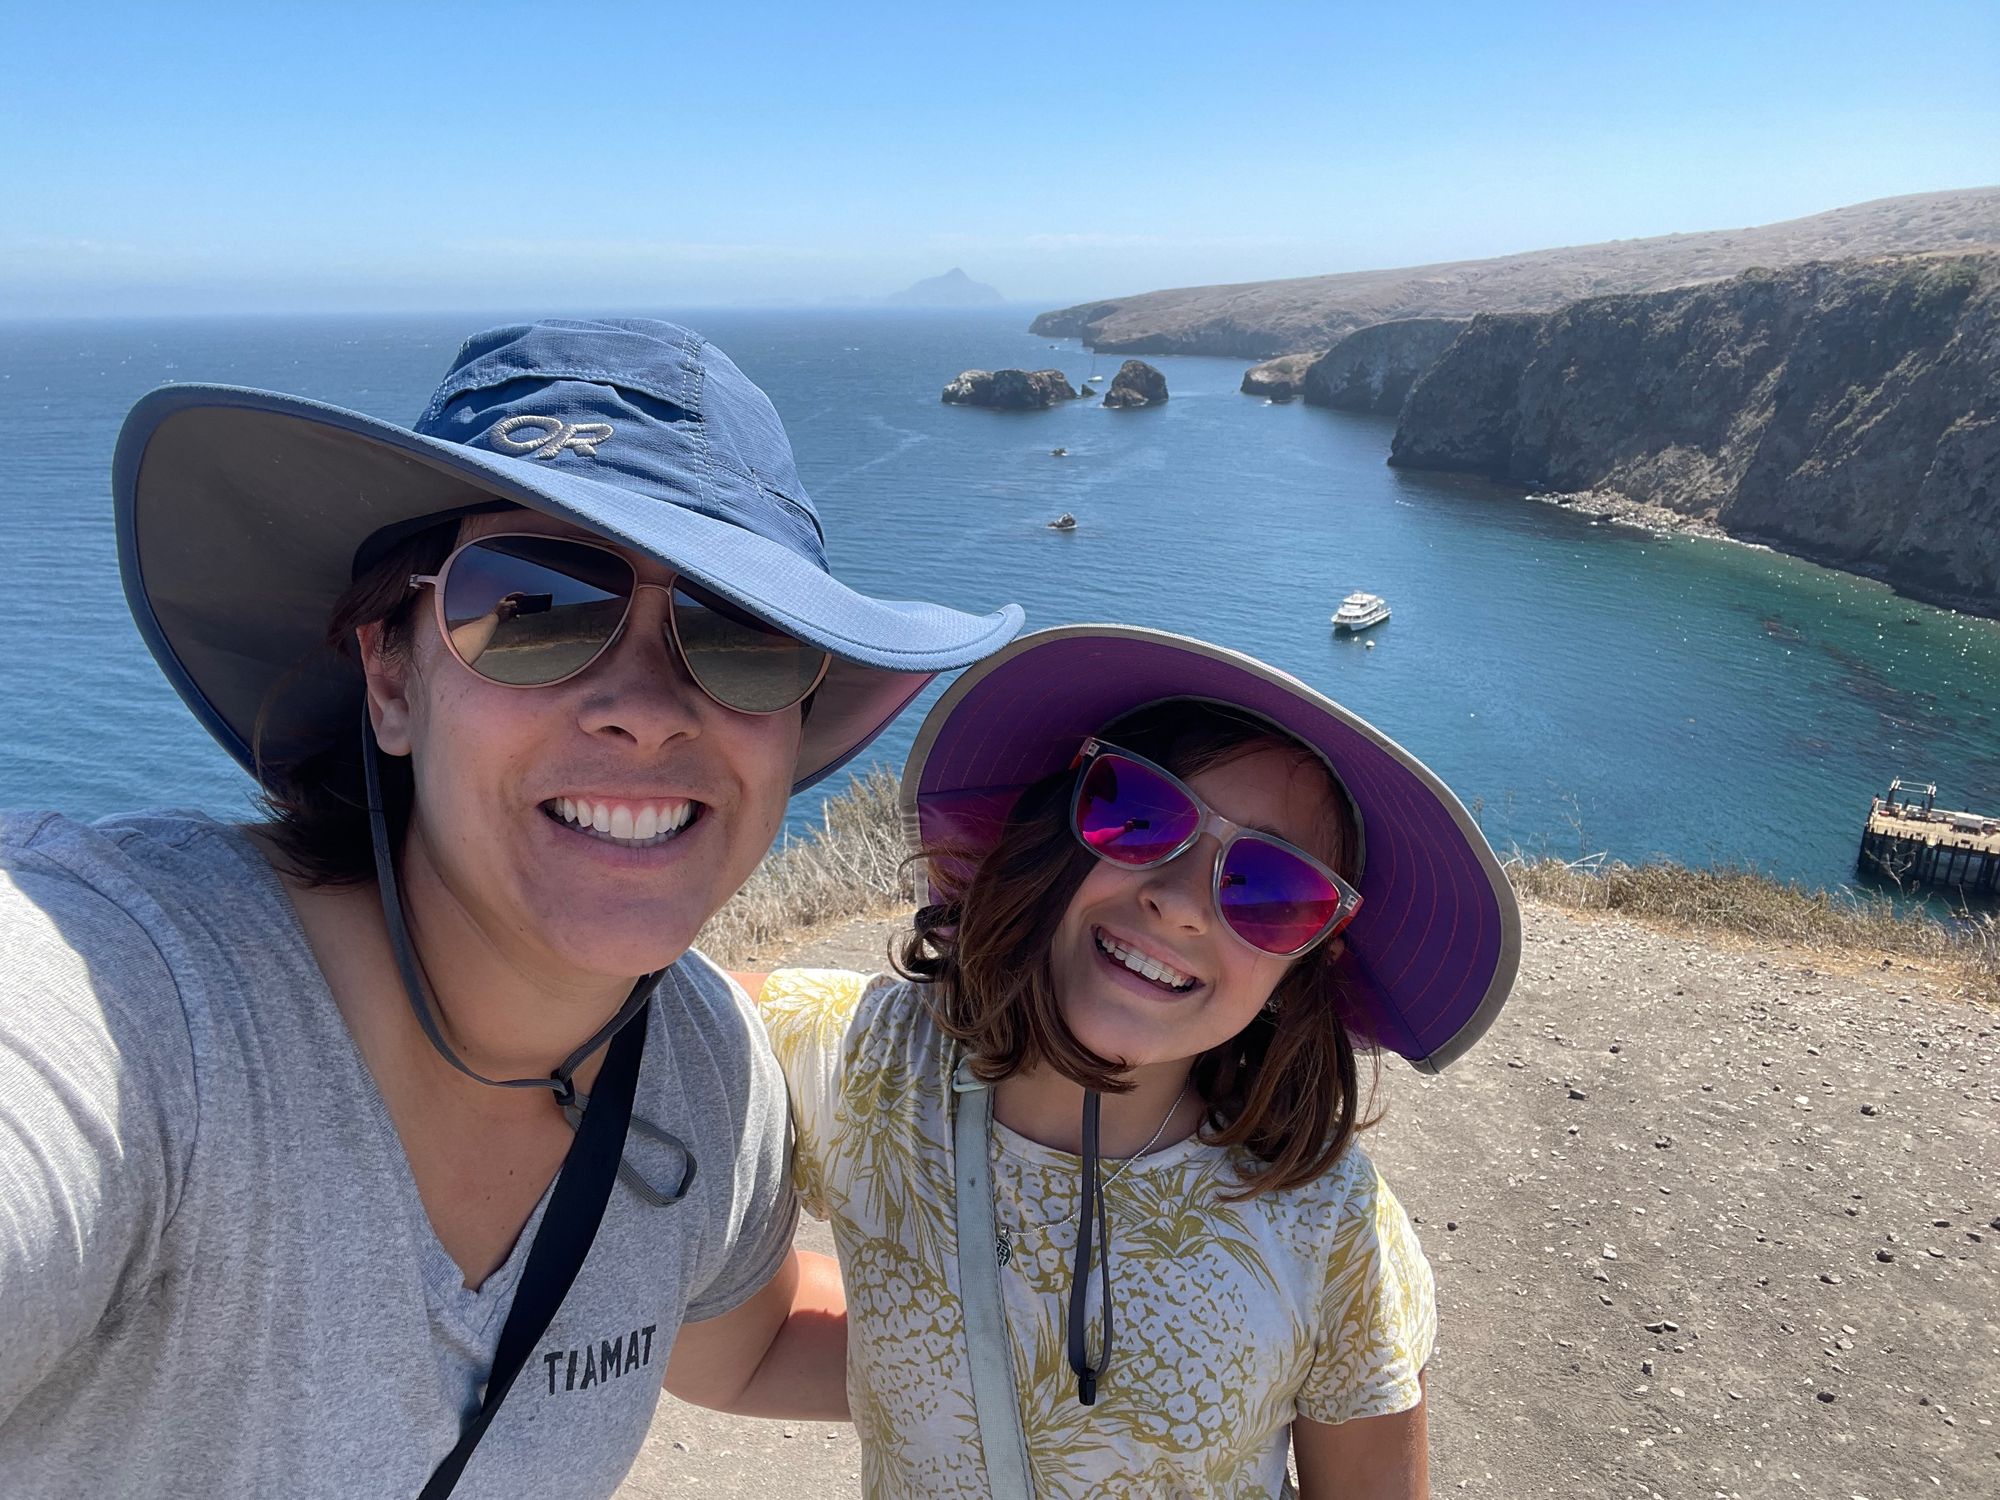 Visiting the Channel Islands